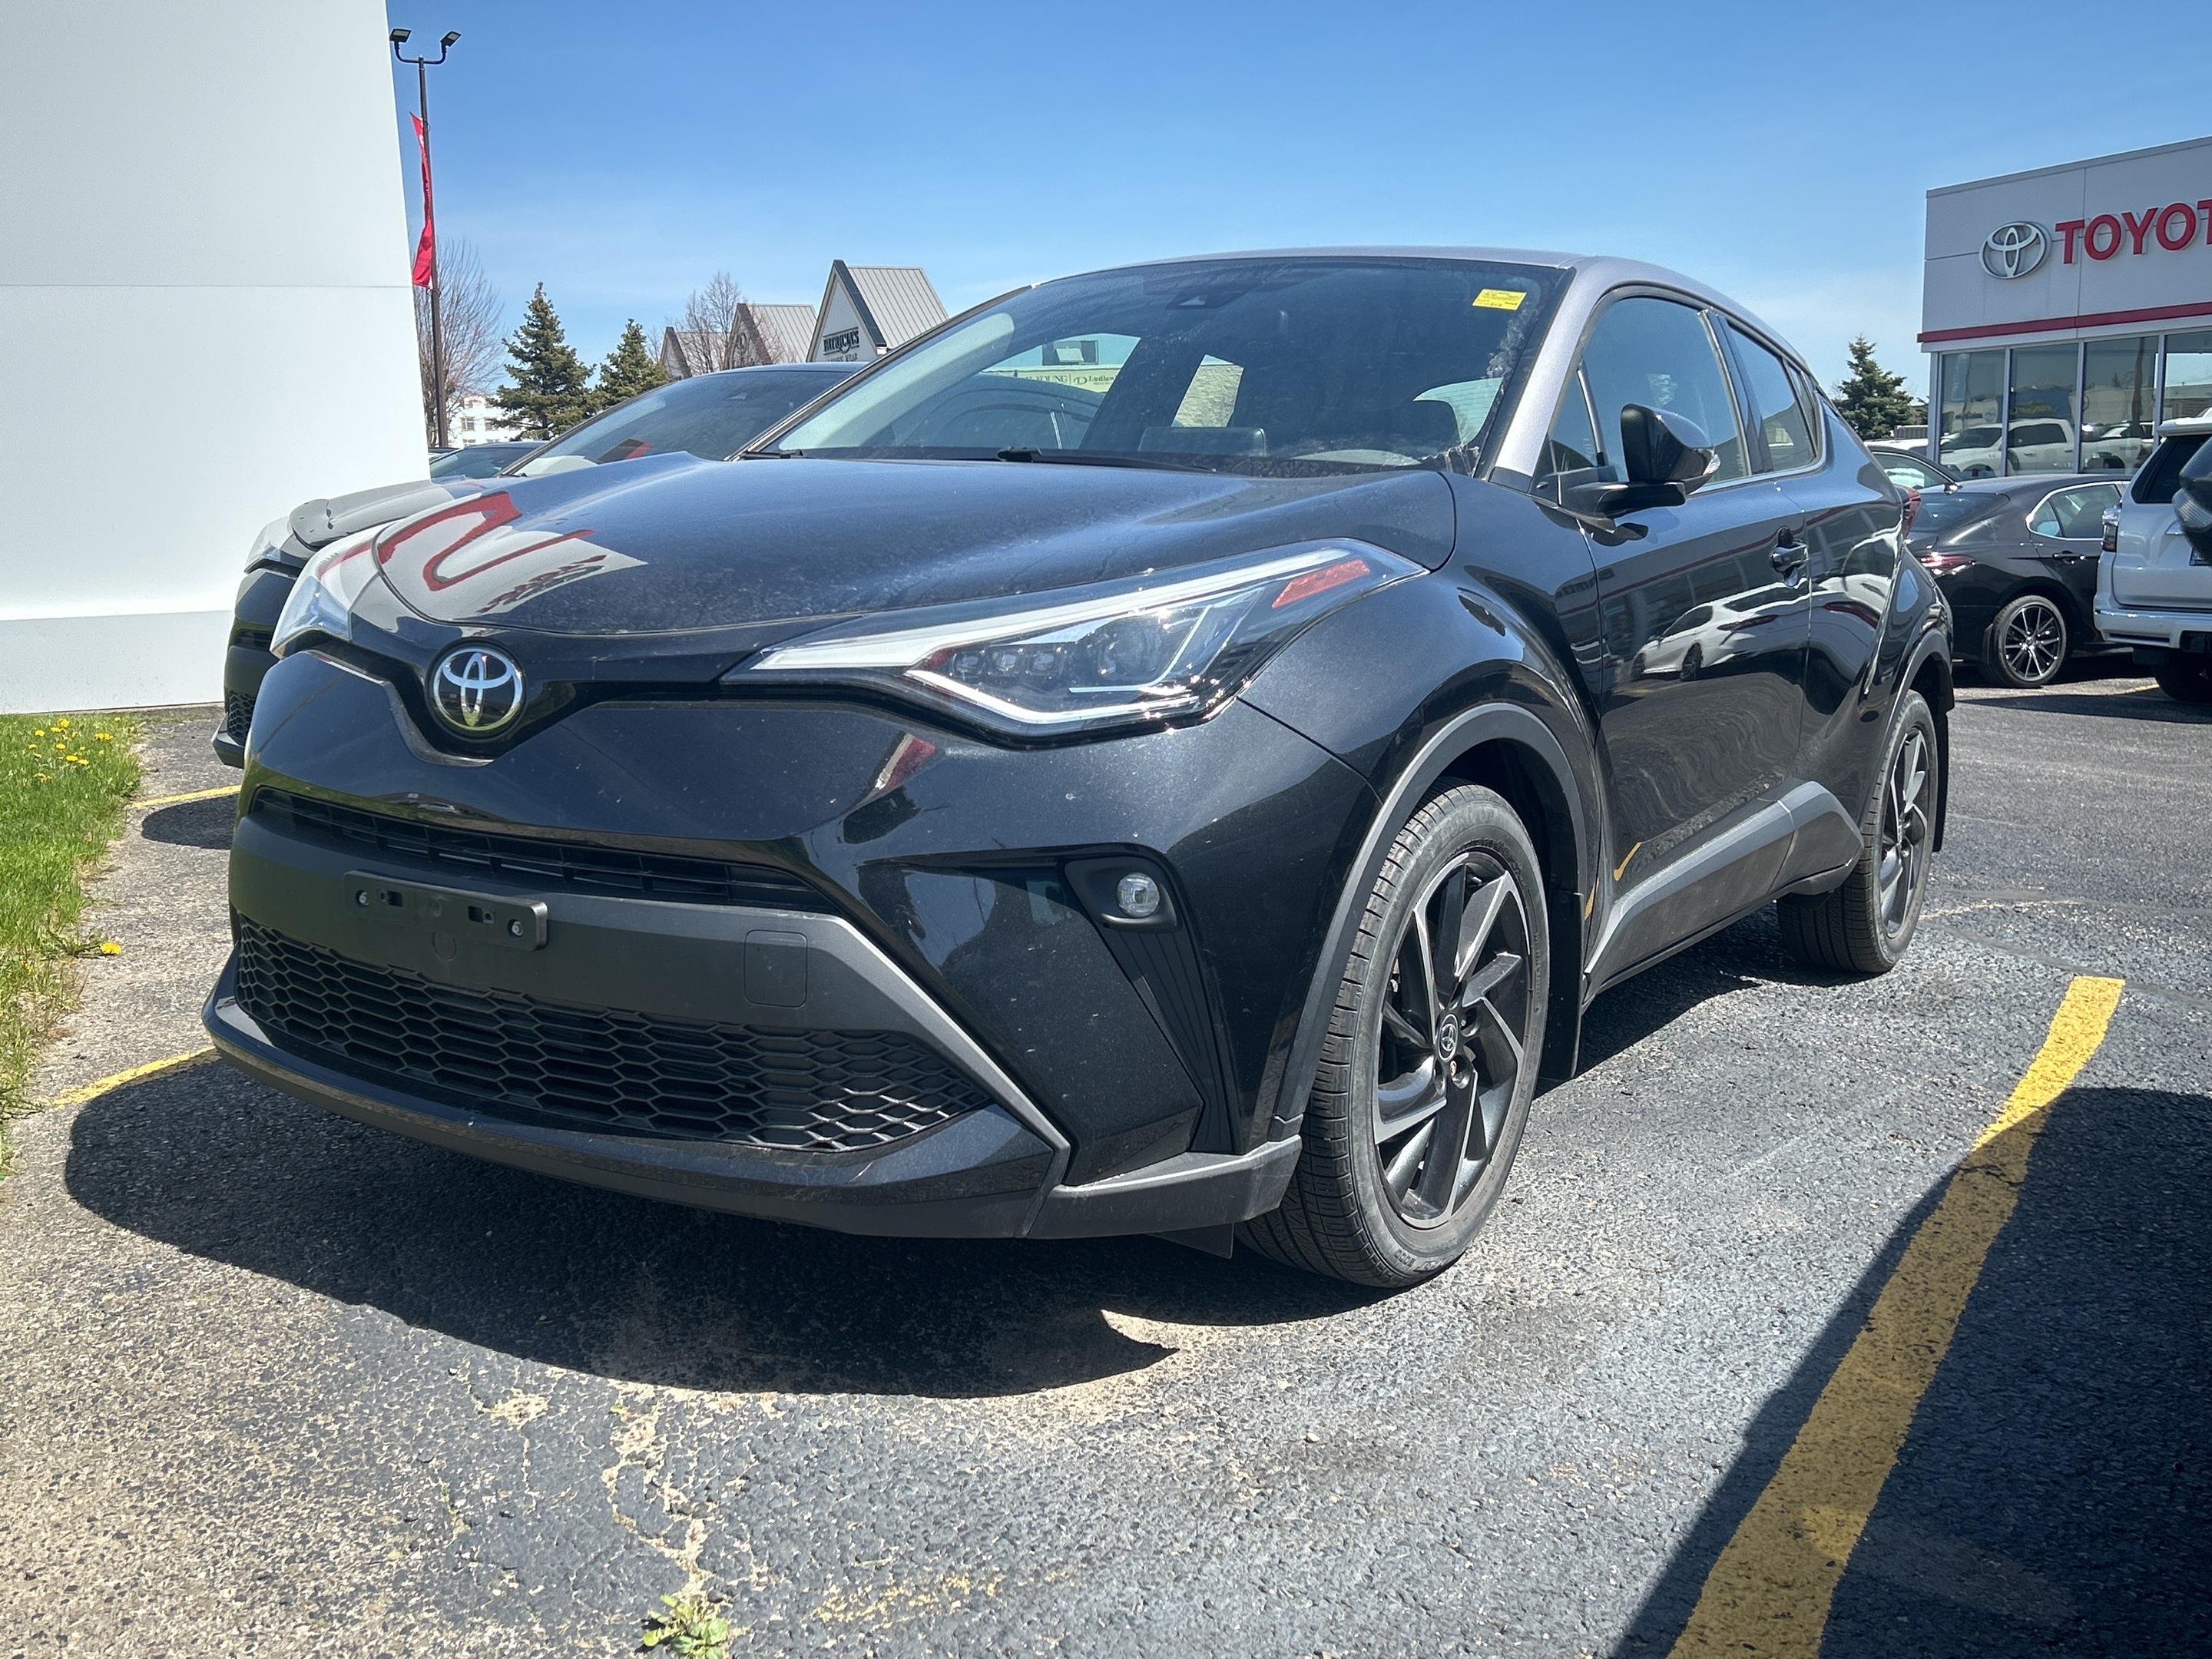 2020 Toyota C-HR Limited Trim - Black with Silver roof - 18 alloys